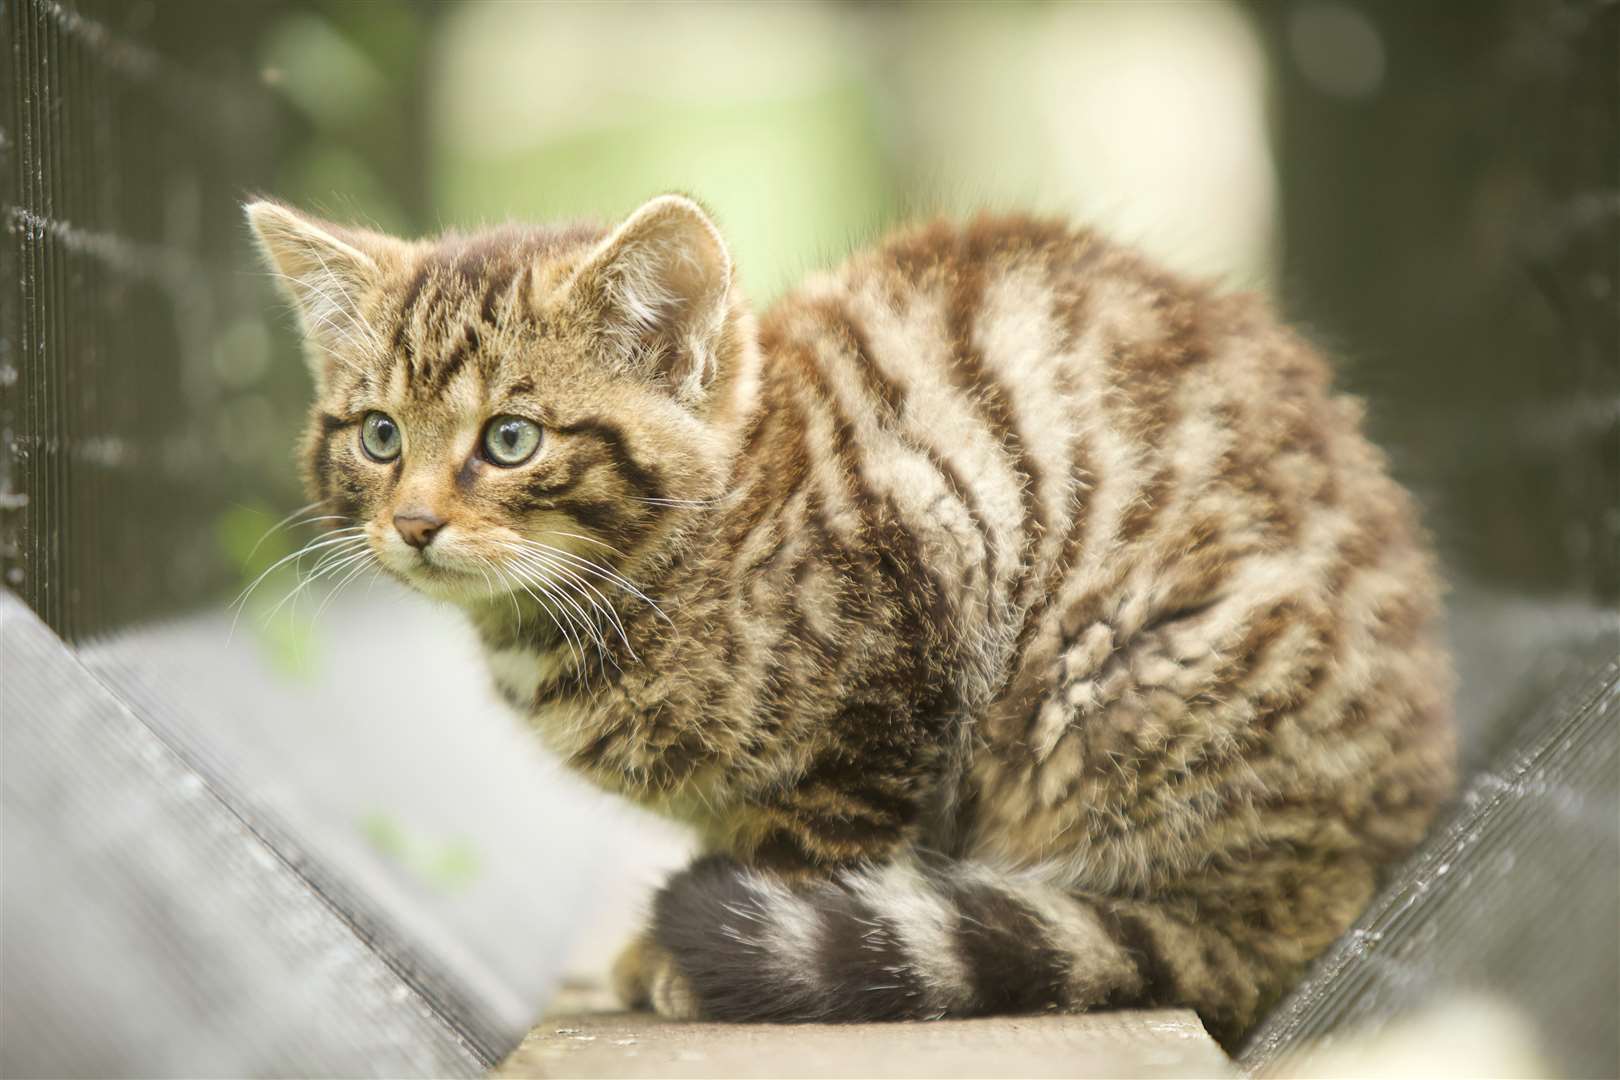 This picture of one of the new wildcat kittens was taken by reserve manager Innes MacNeill.